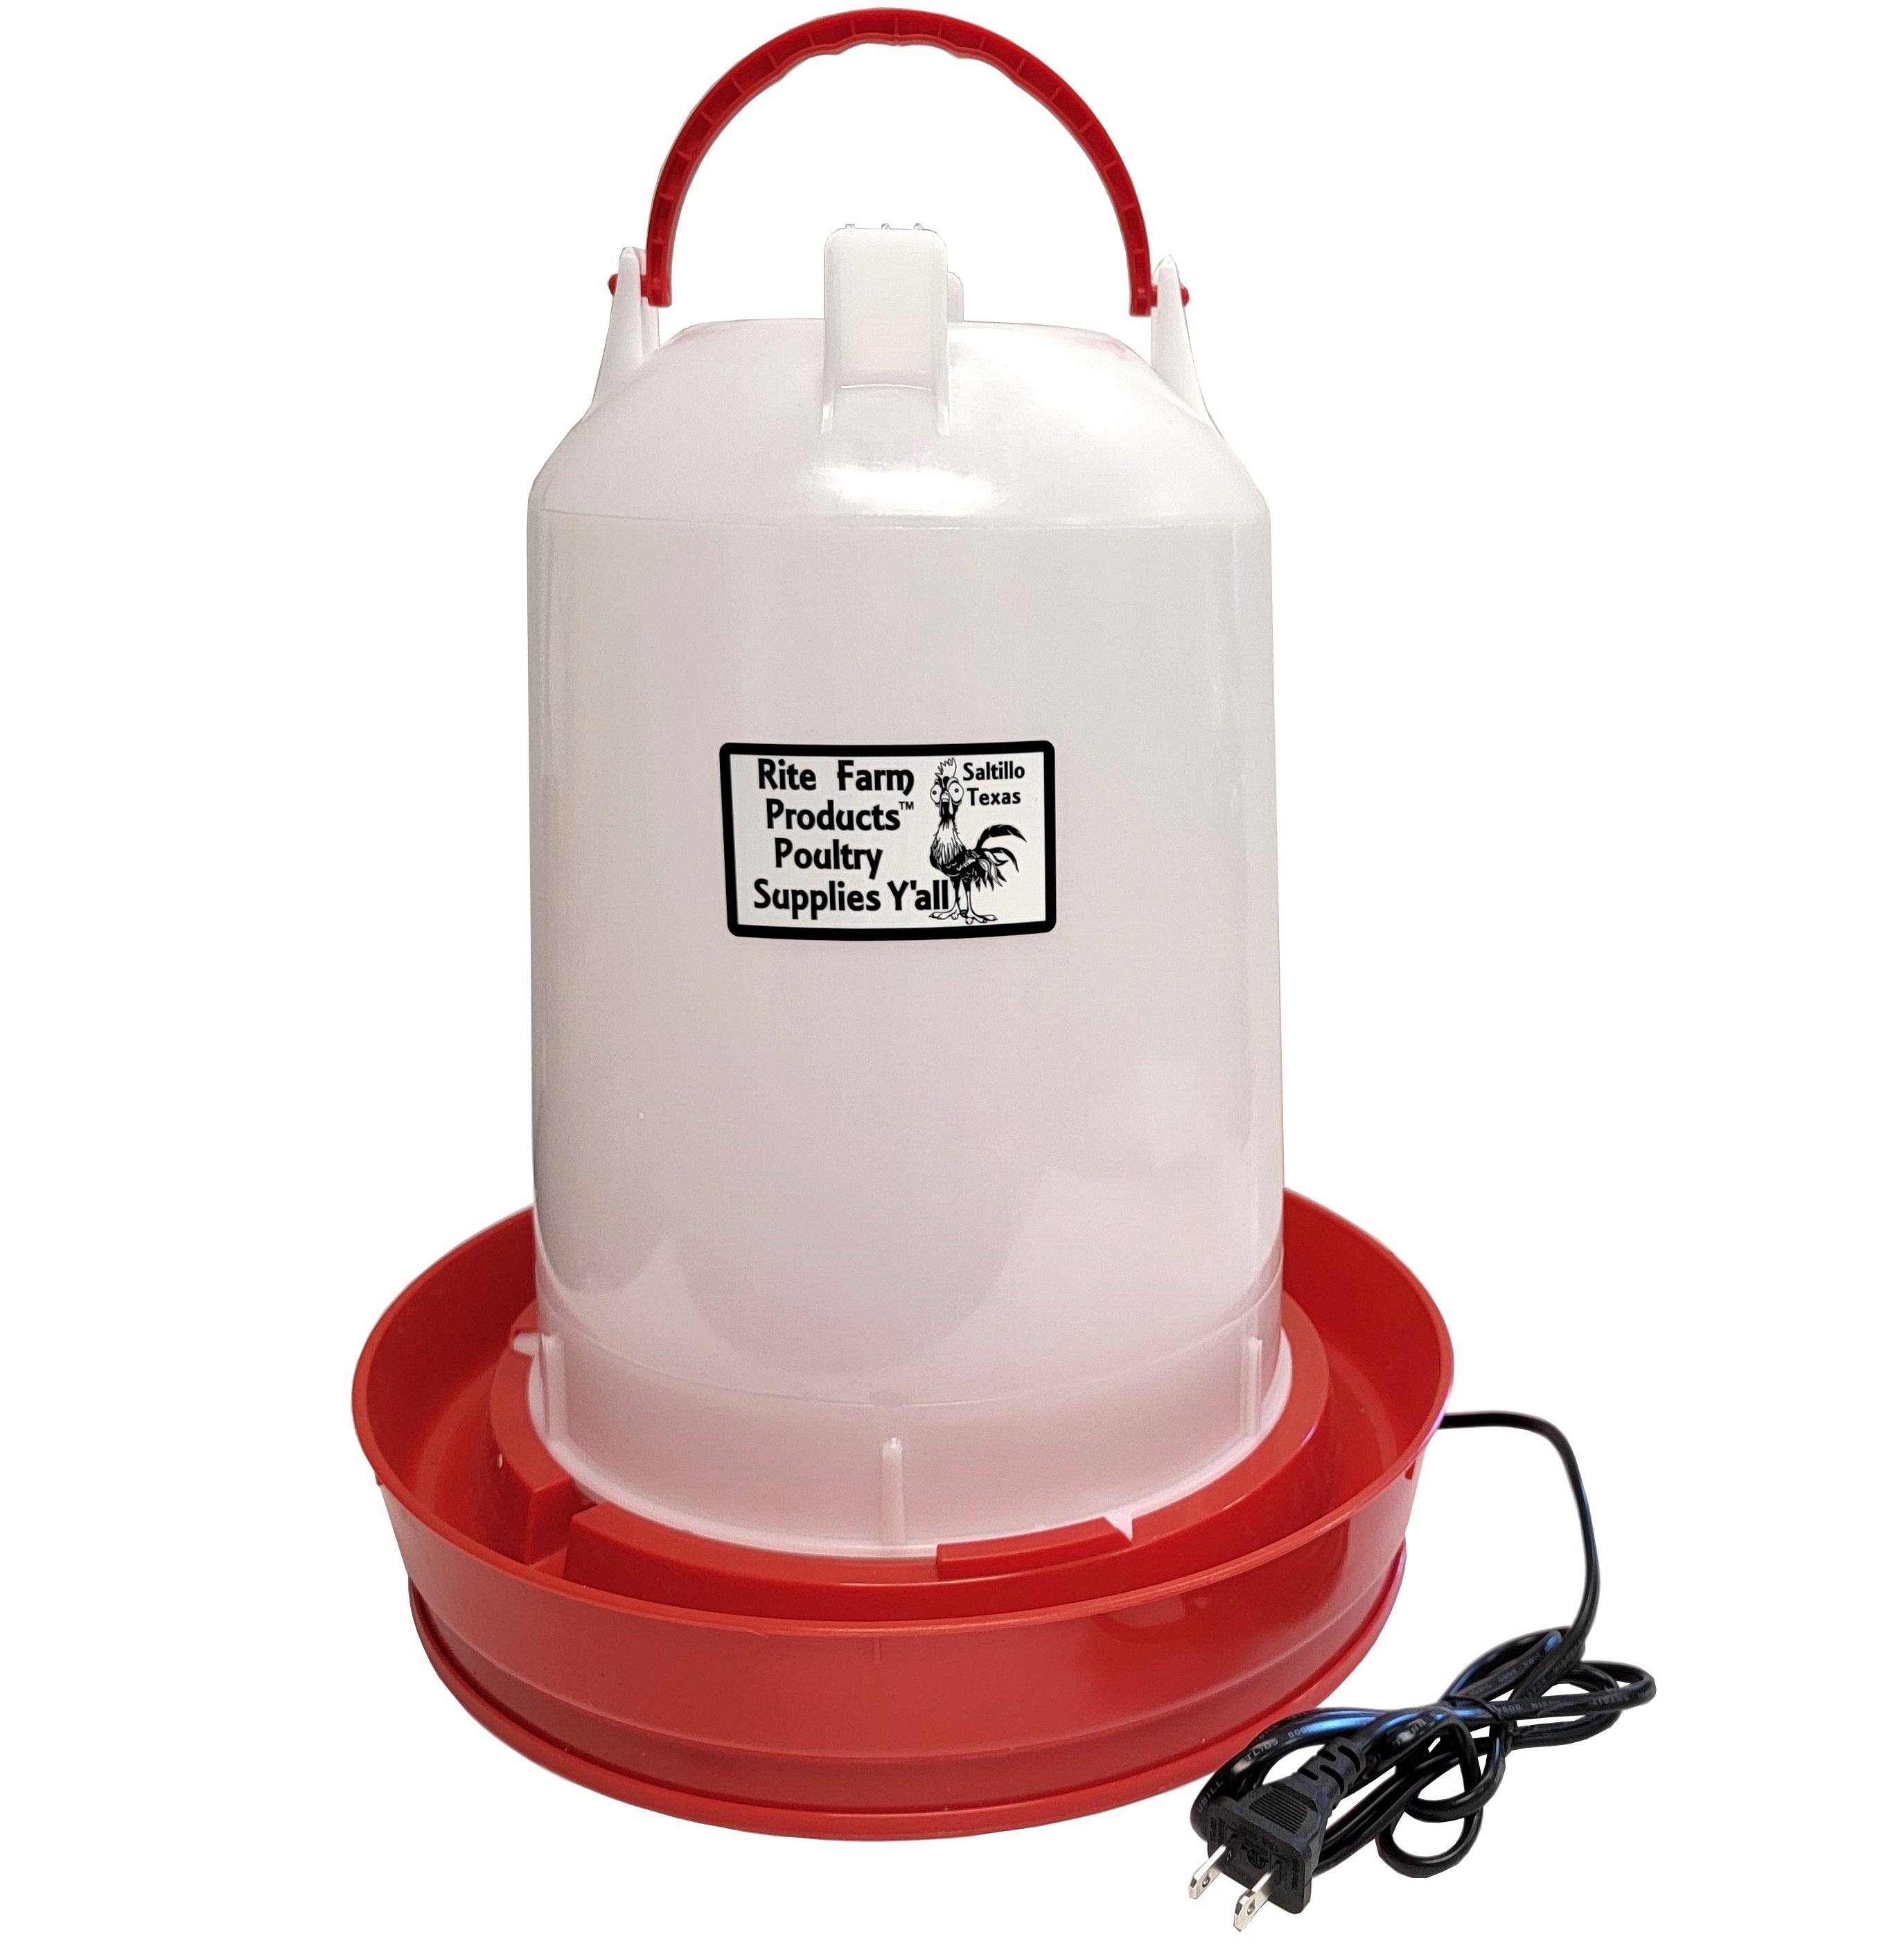 Rite Farm Products 3.7 gallon HEATED gravity chicken poultry waterer